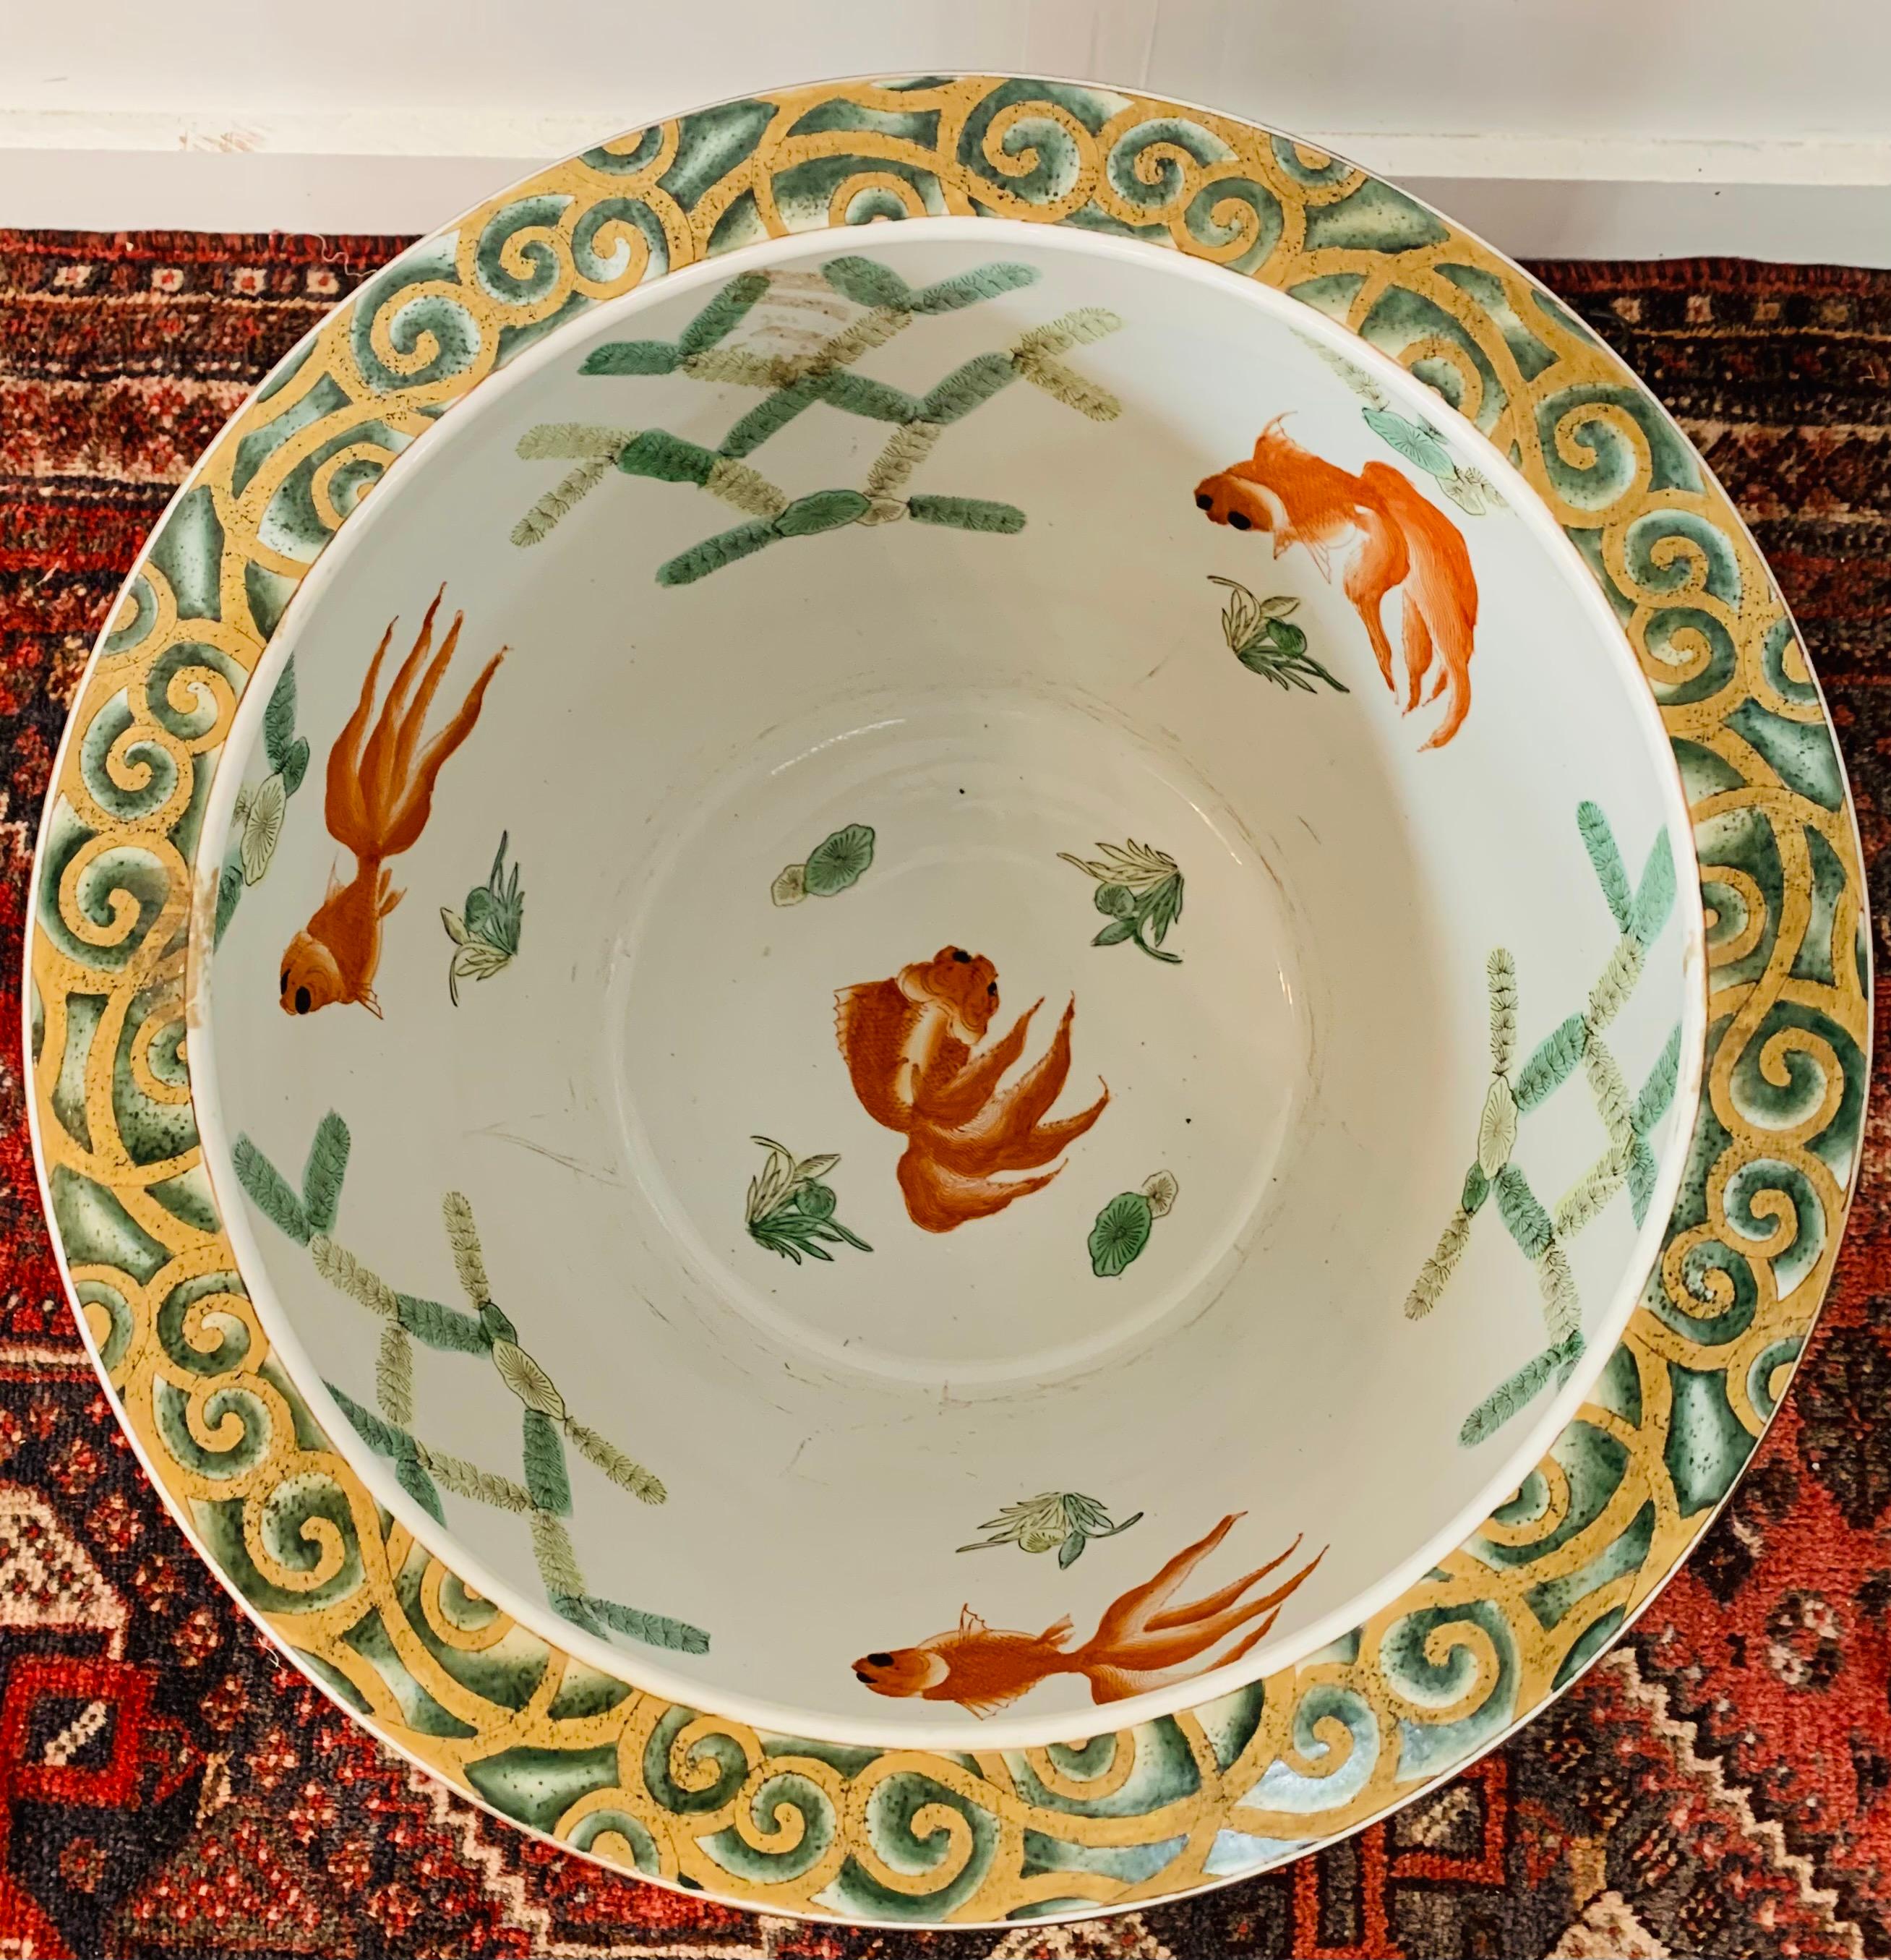 Mid-20th Century Large Vintage Chinese Green and Gold Jardinière, Fish Bowl or Planter For Sale